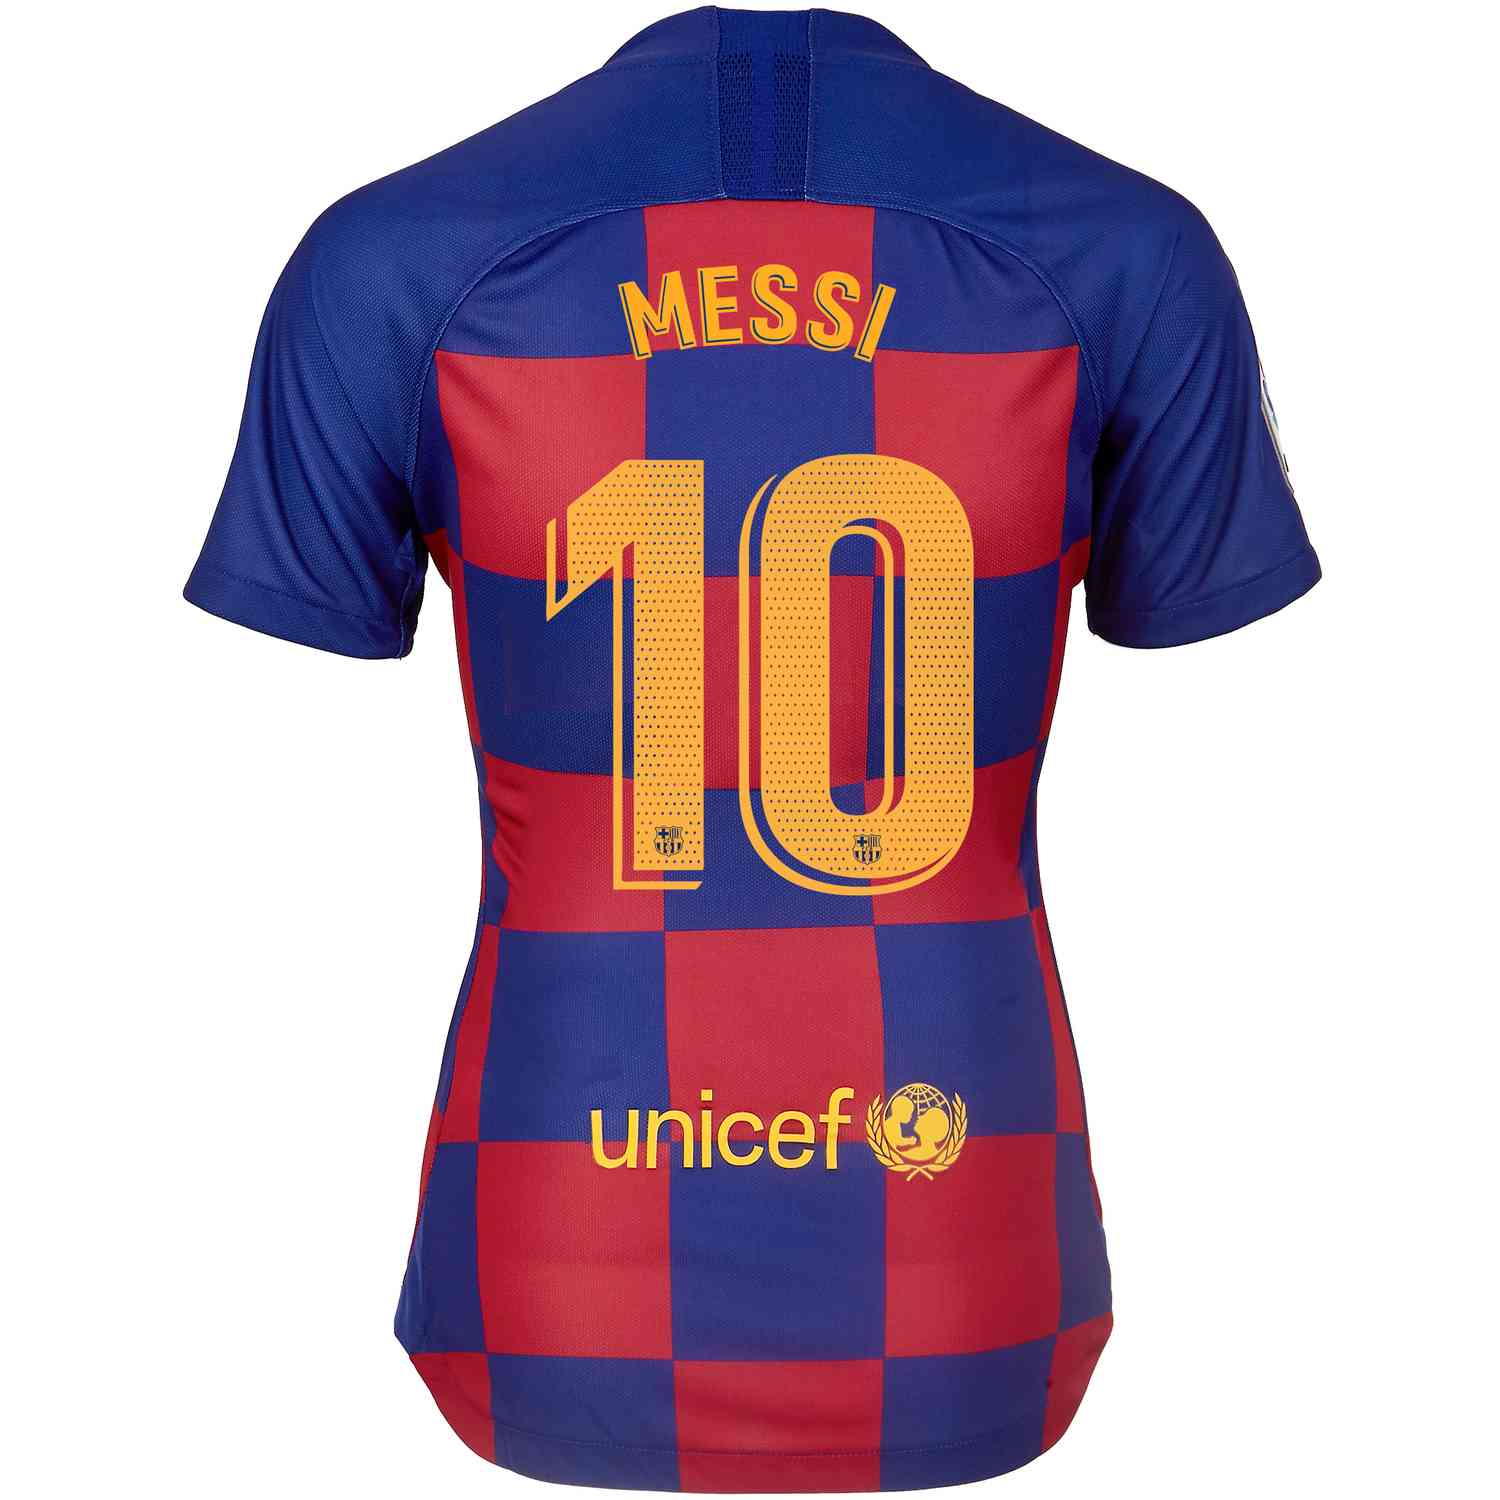 messi womens jersey